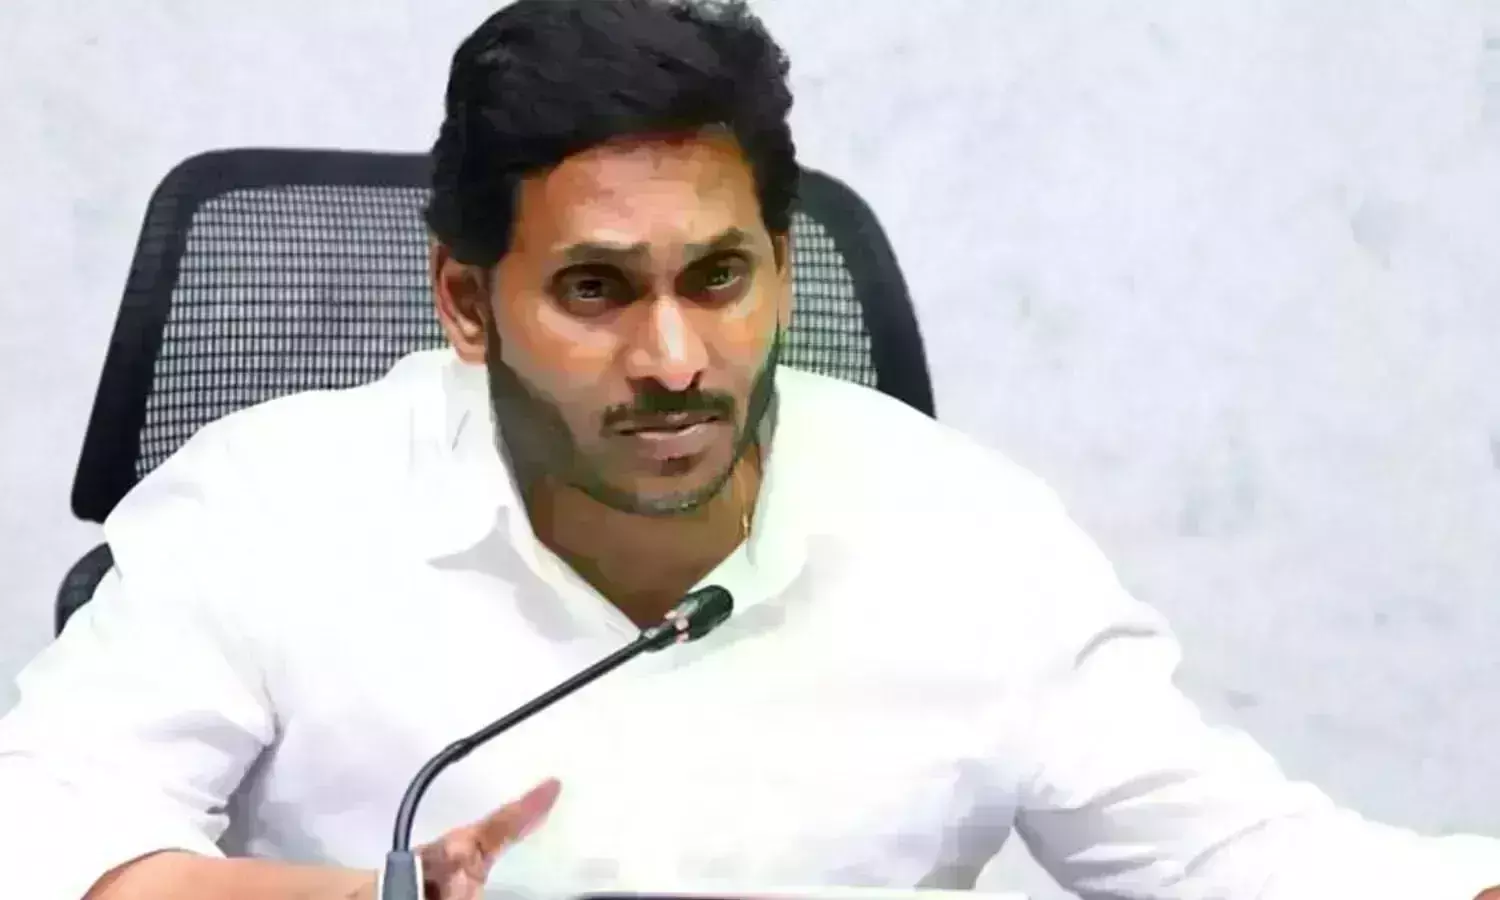 YS Jagan alerts officials on Covid’s JN.1 variant, tells people not to panic